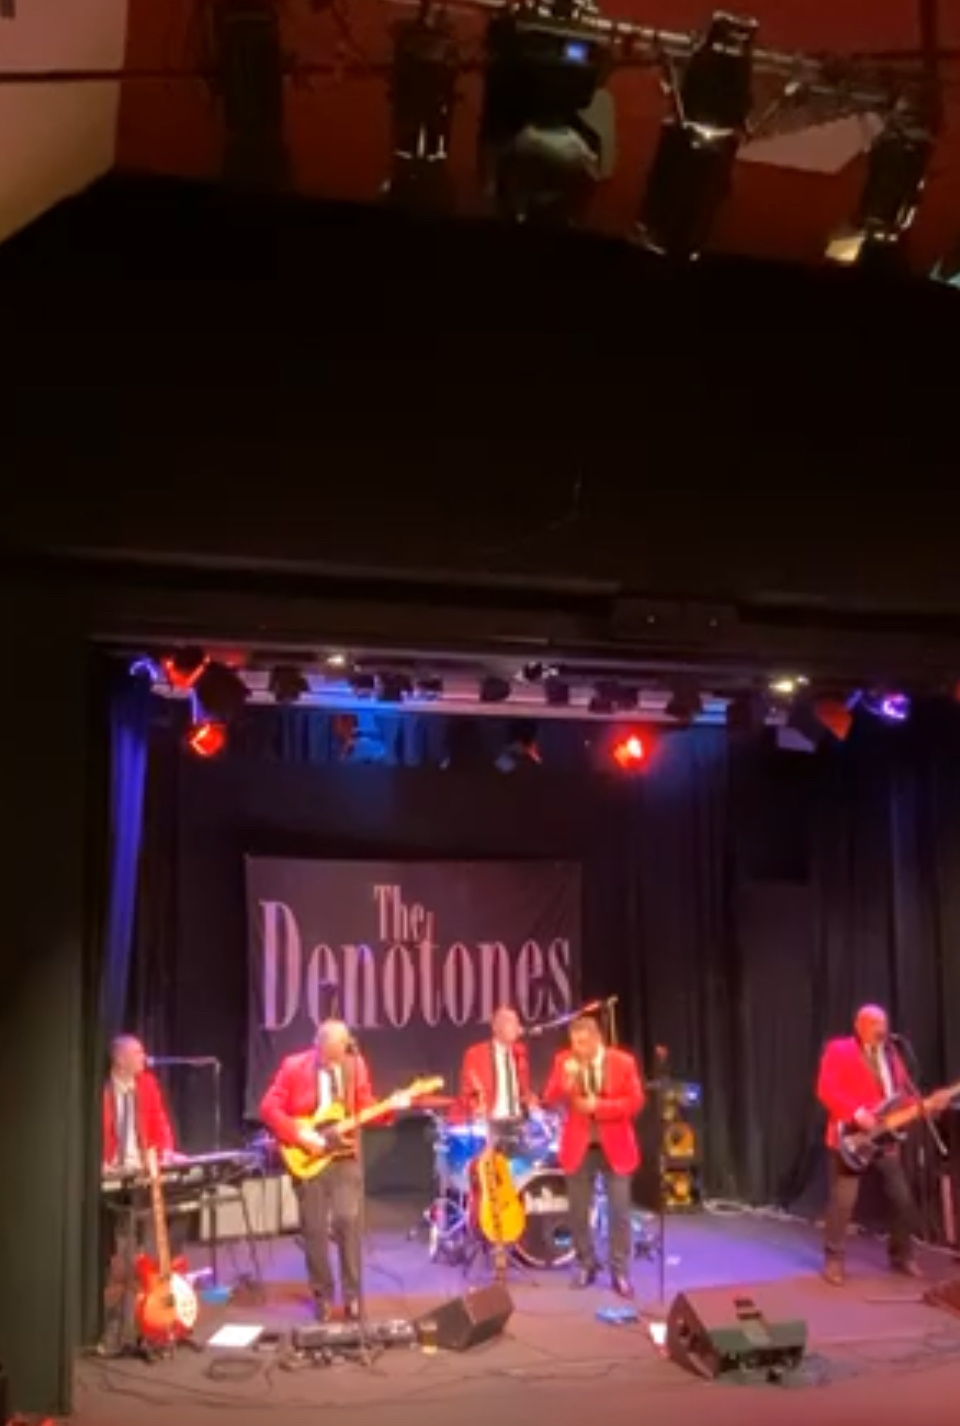 The Denotones 60s experience at Wing hall